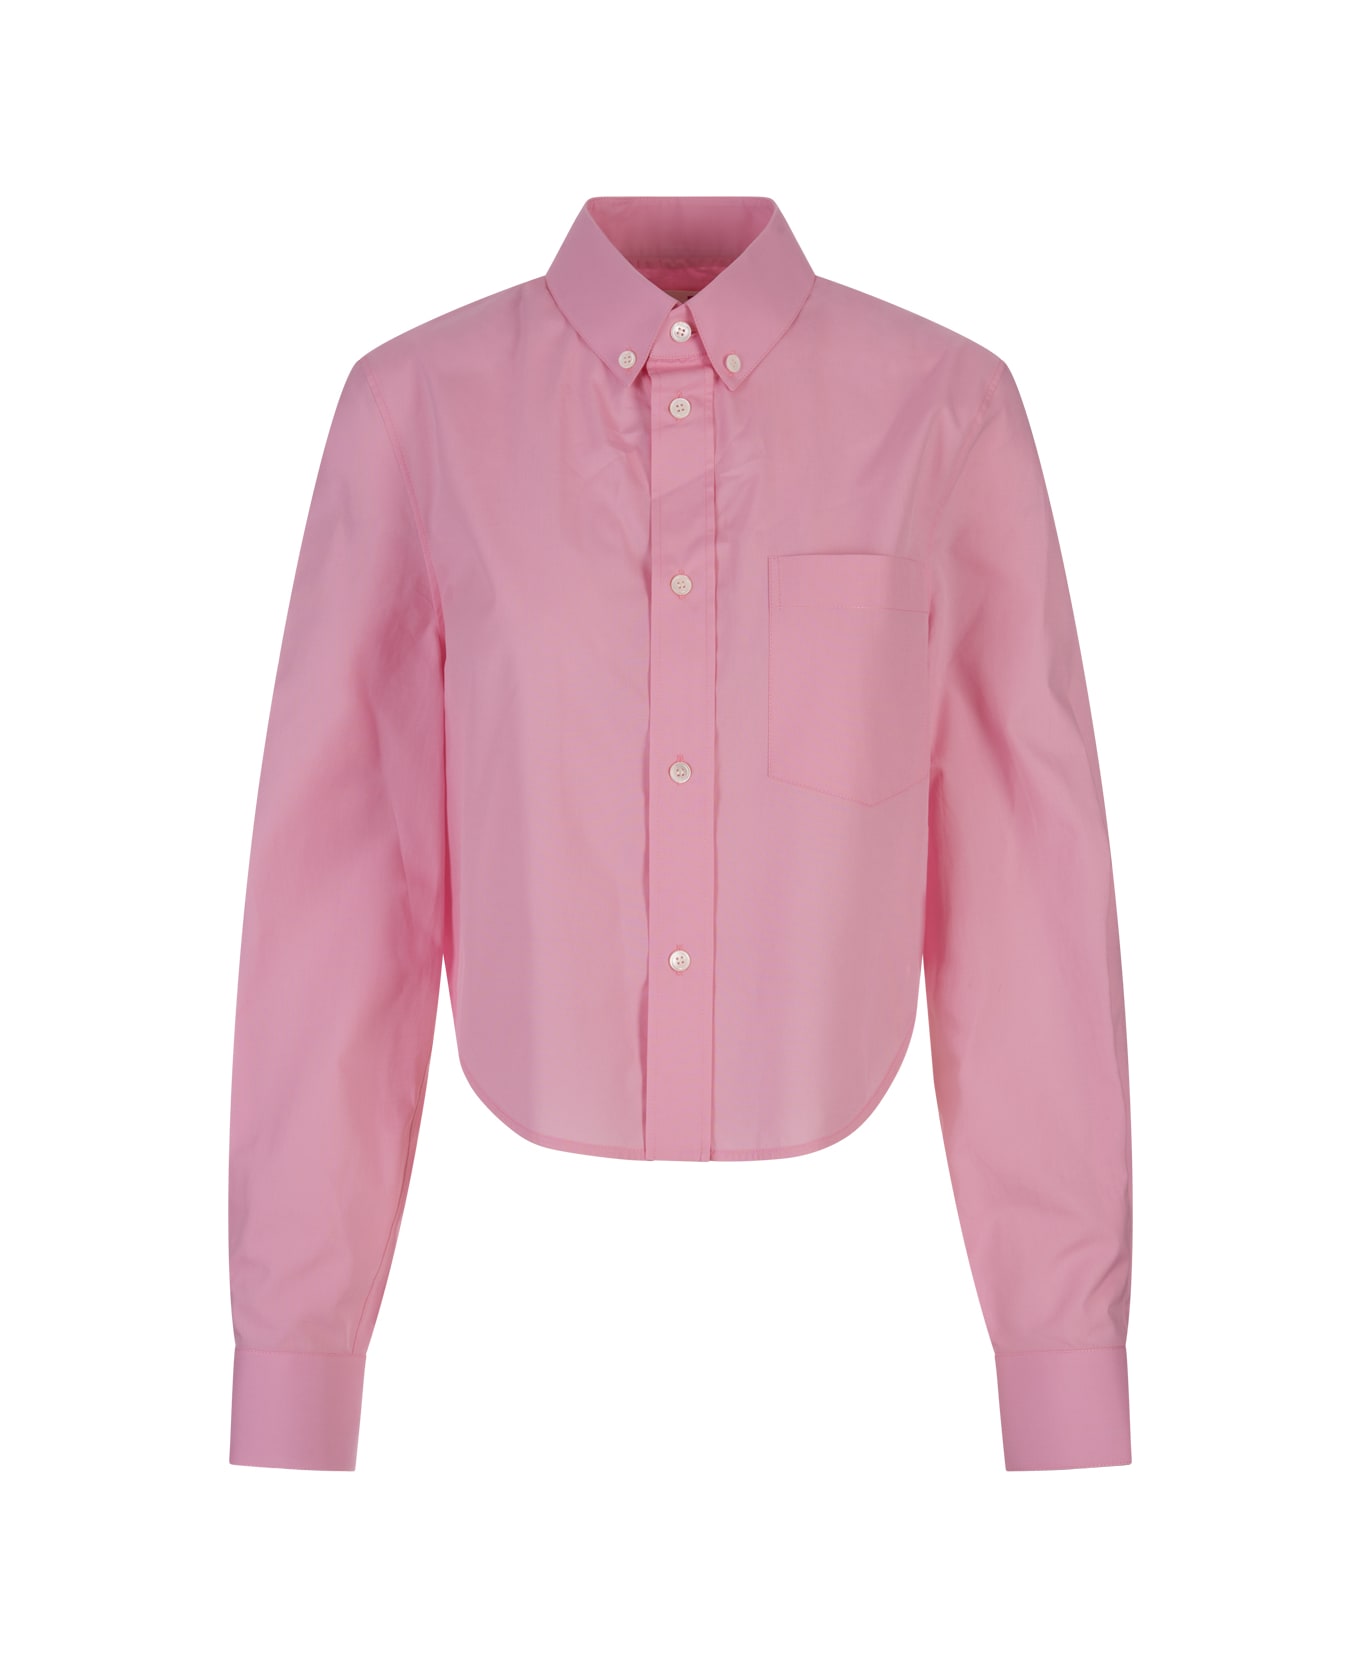 Marni Cropped Shirt In Pink Cotton - Pink シャツ